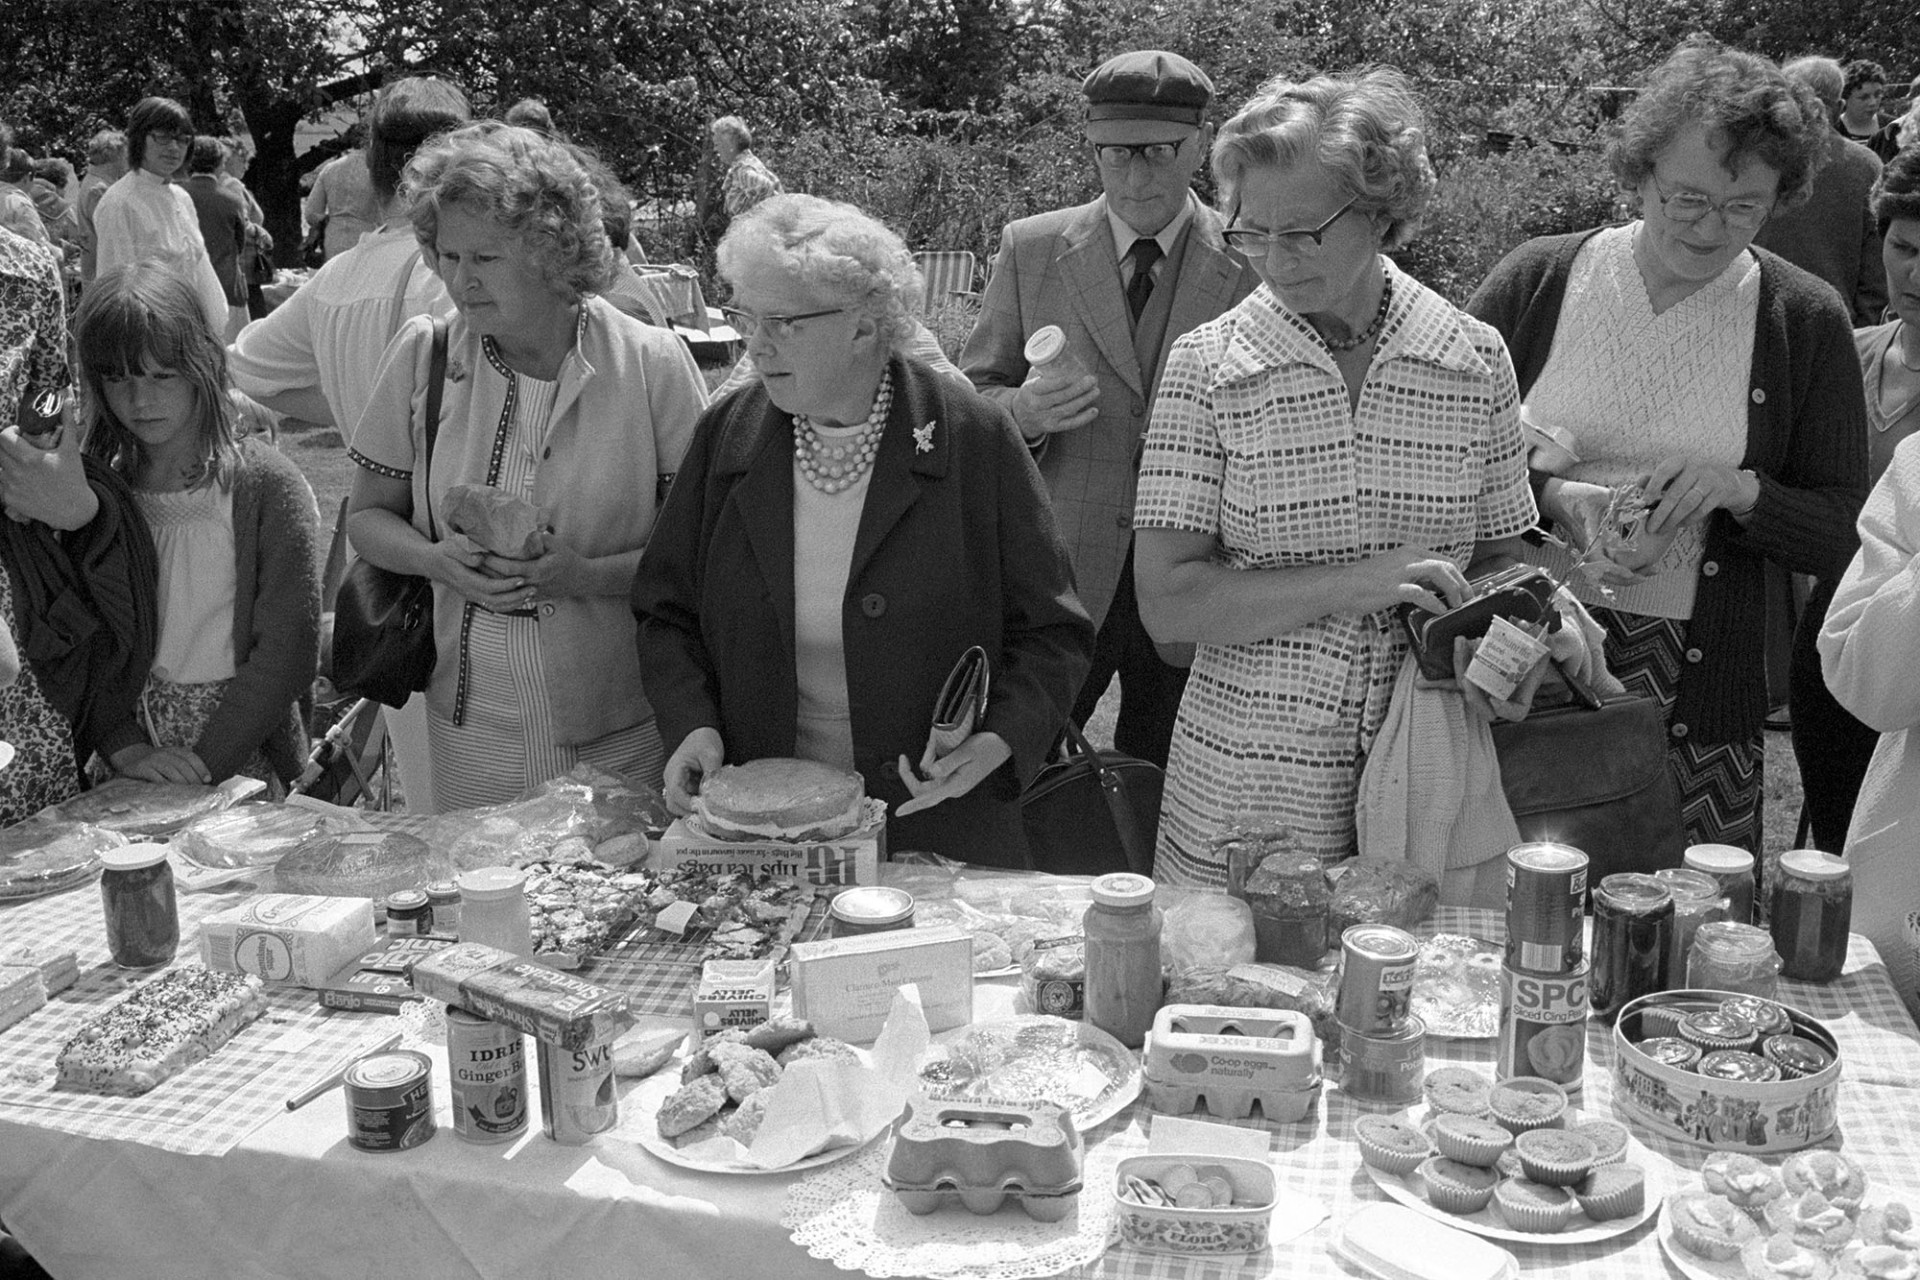 Garden party with stall and women looking at produce on table. 
[Women, a young girl and a gentleman looking at produce and groceries on a table at a garden party at Barlands, Dolton. The stall includes cakes, eggs, jars of preserves, tinned food, a box of PG tips, and biscuits.]